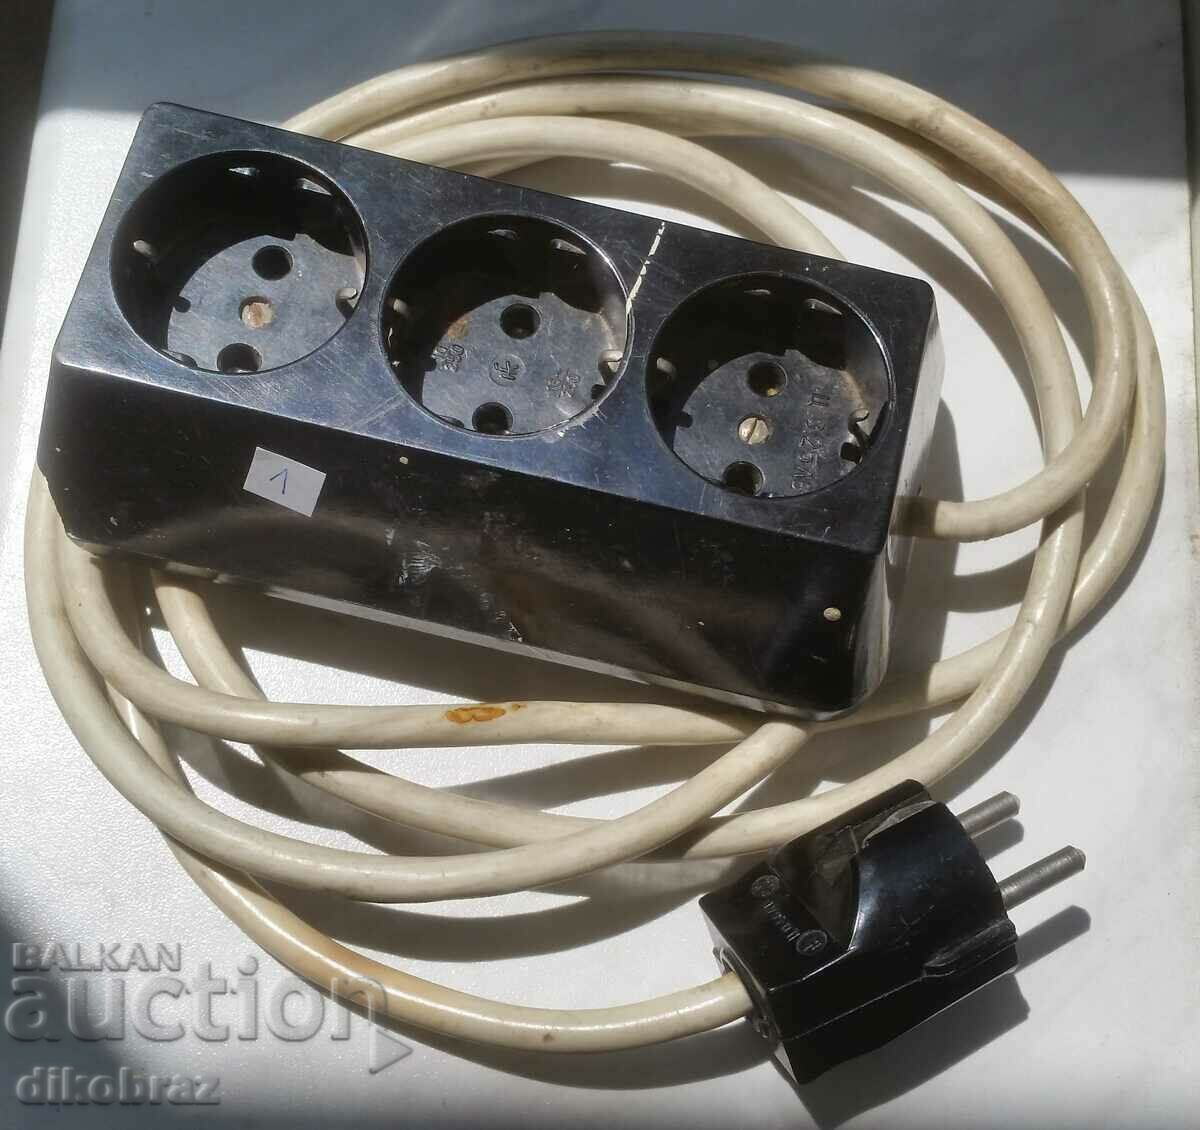 Shuko extension cord with 3 sockets - from a penny